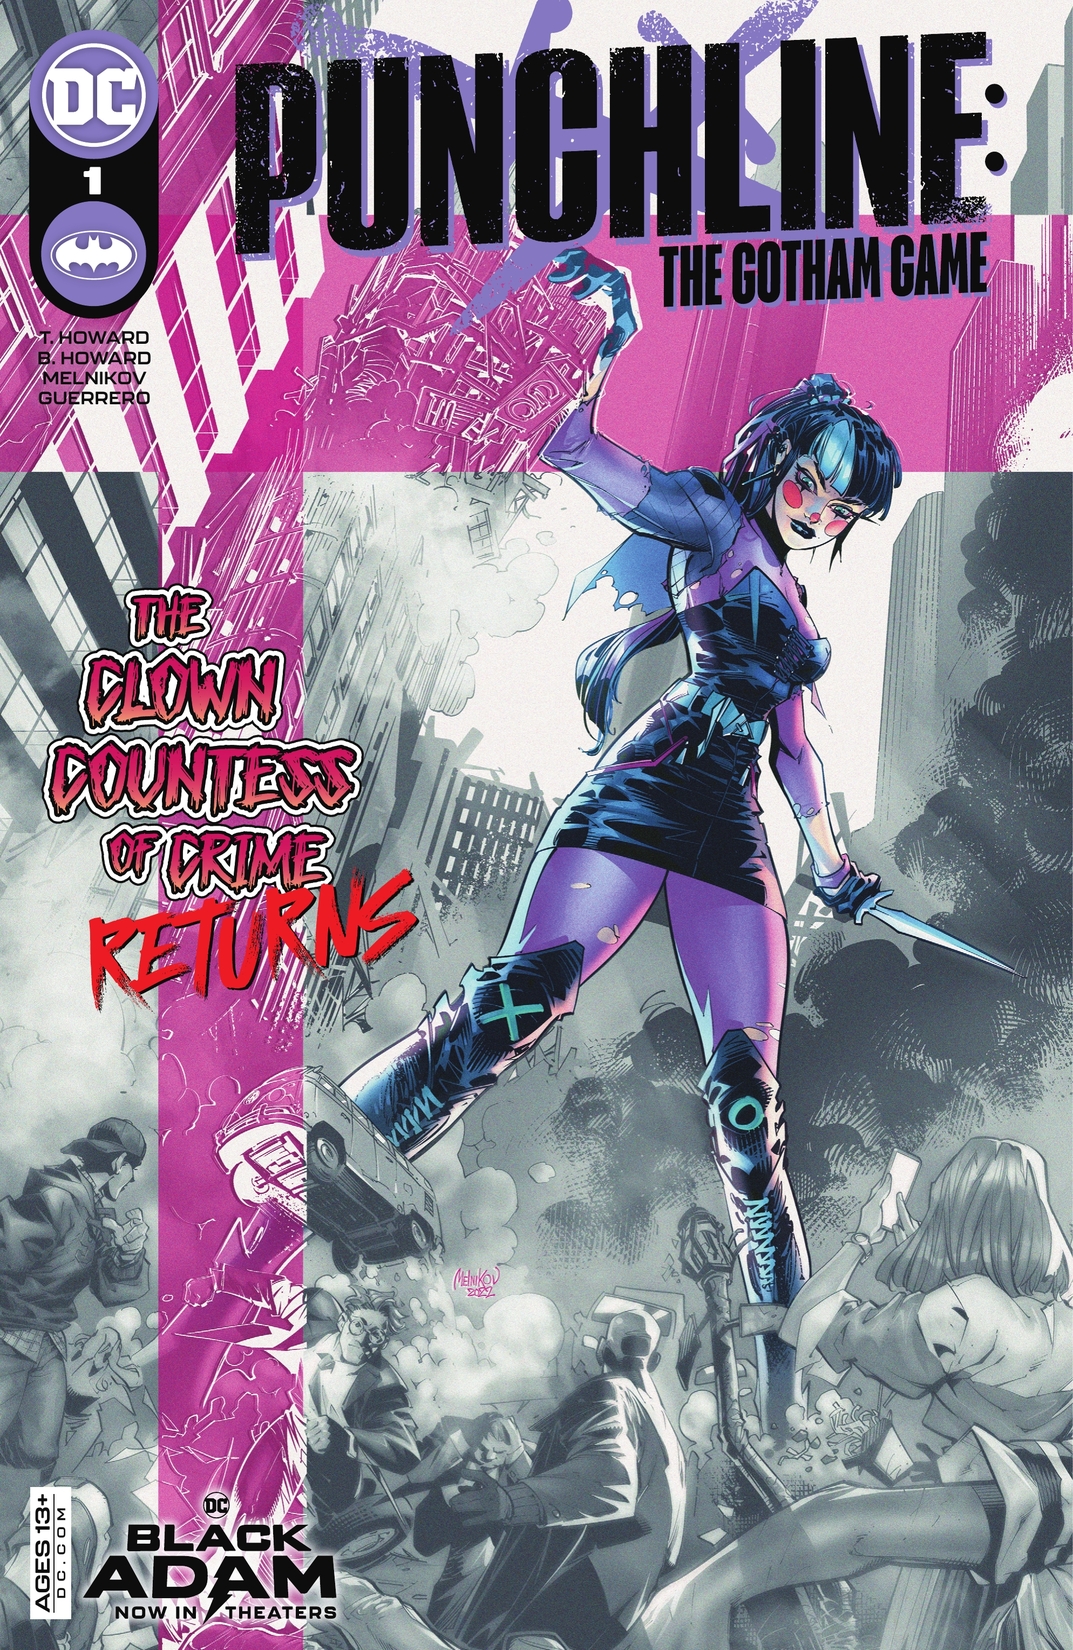 Punchline: The Gotham Game #1 preview images